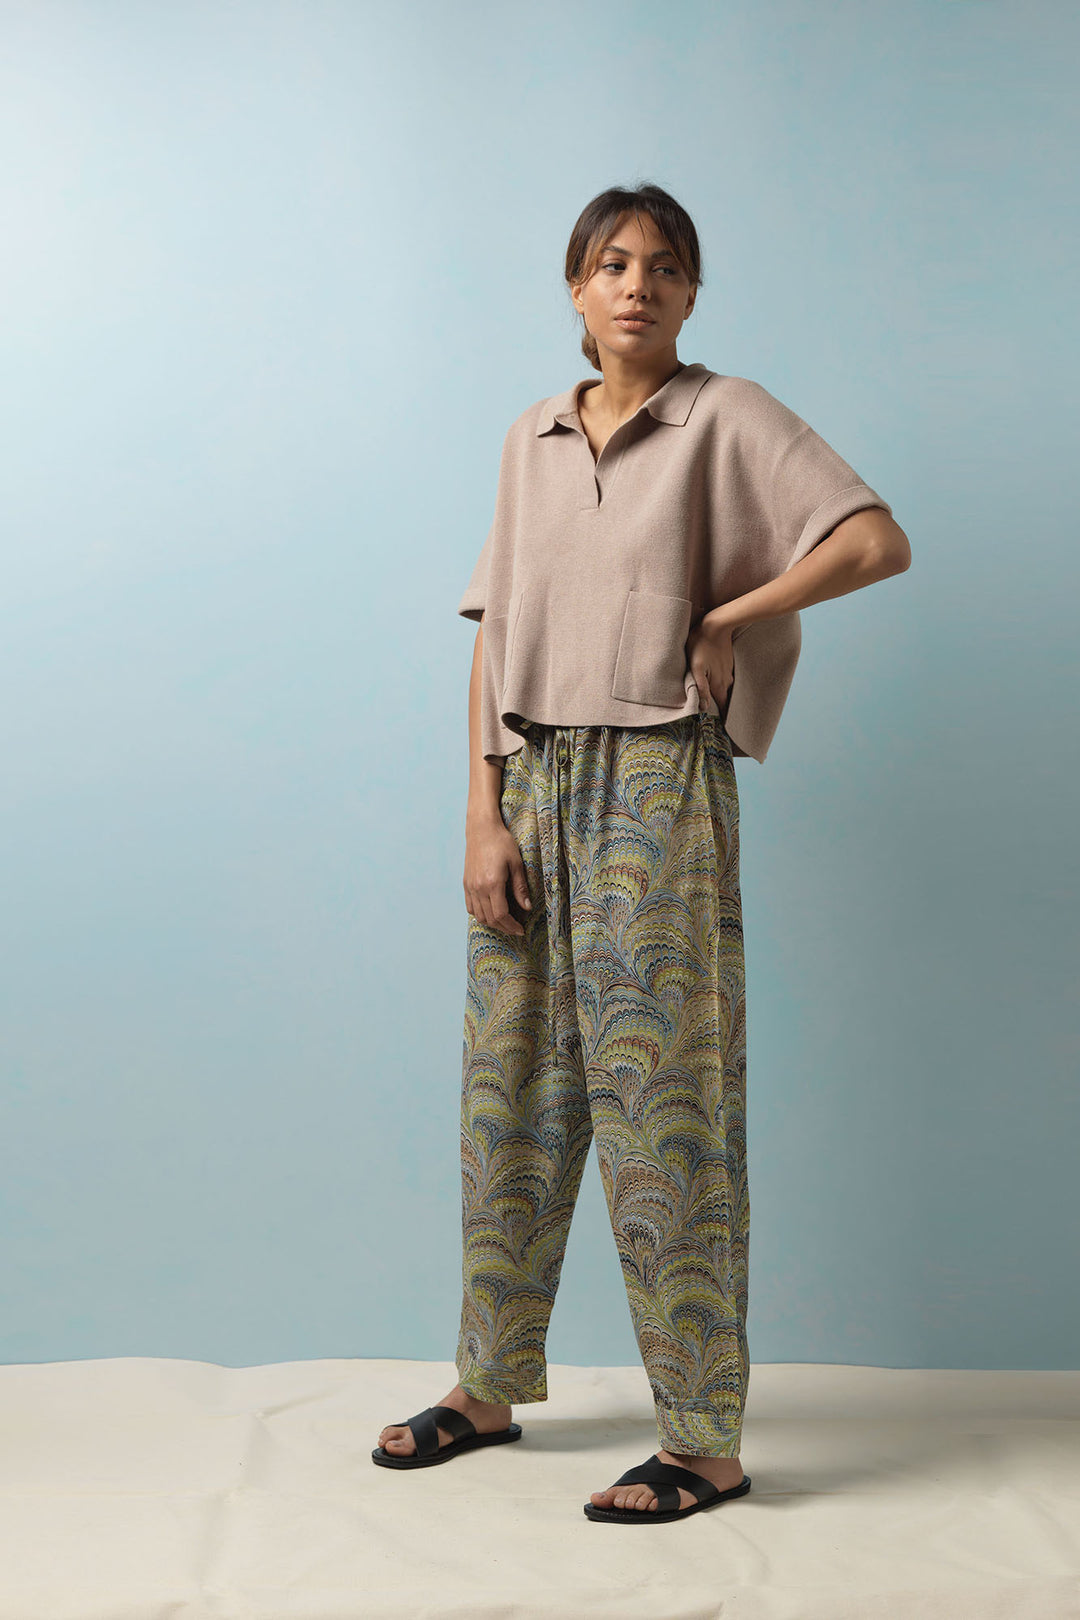 Marbled Green Crepe Pants - One Hundred Stars